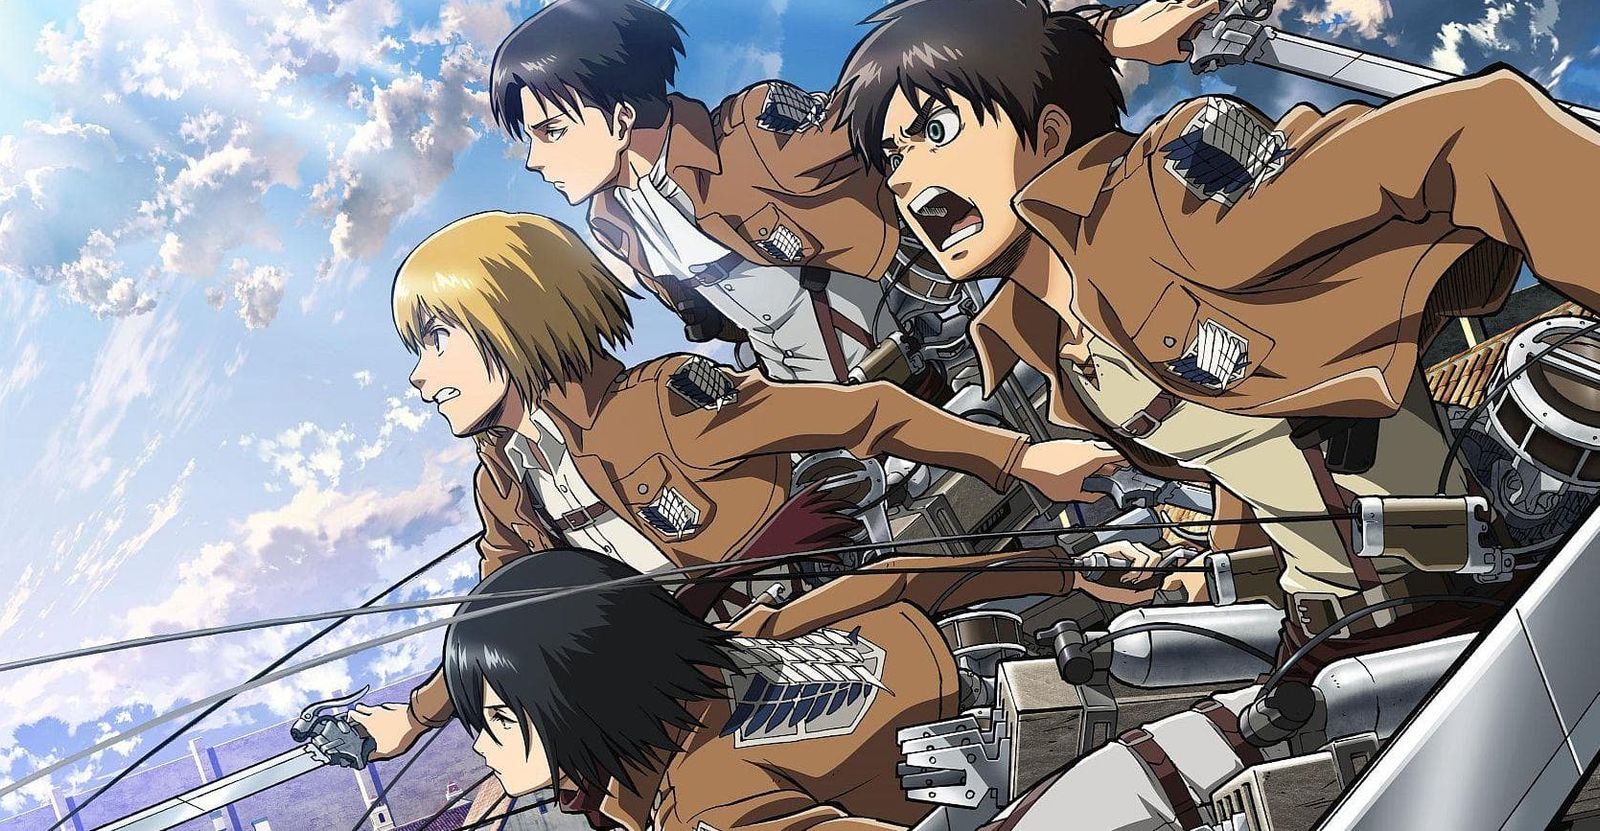 Where to Read Over Attack on Titan Manga Legally Online